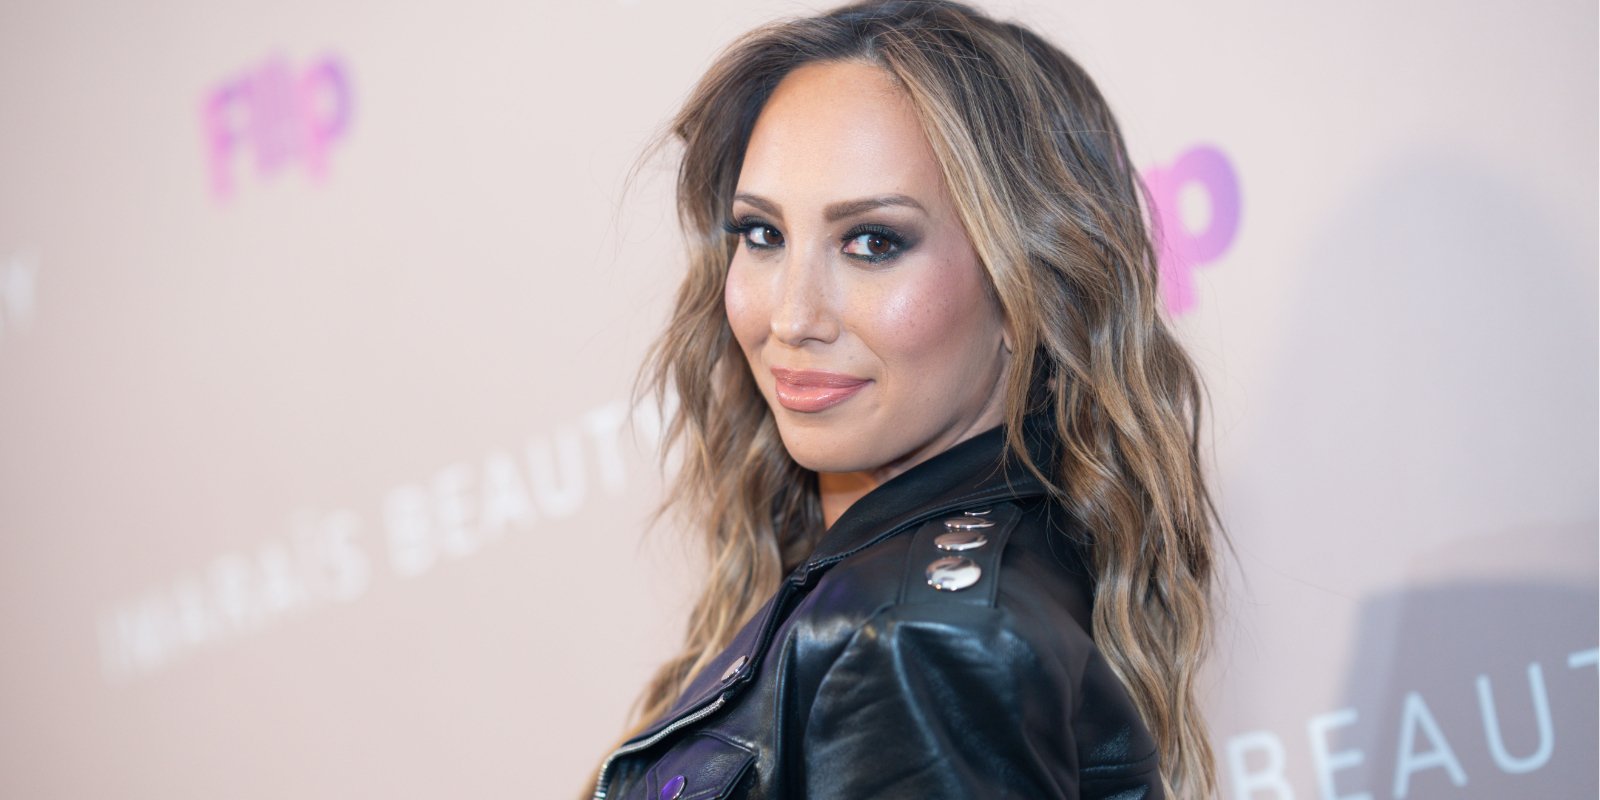 'Dancing with the Stars' pro Cheryl Burke poses at a red carpet event in early November 2022.